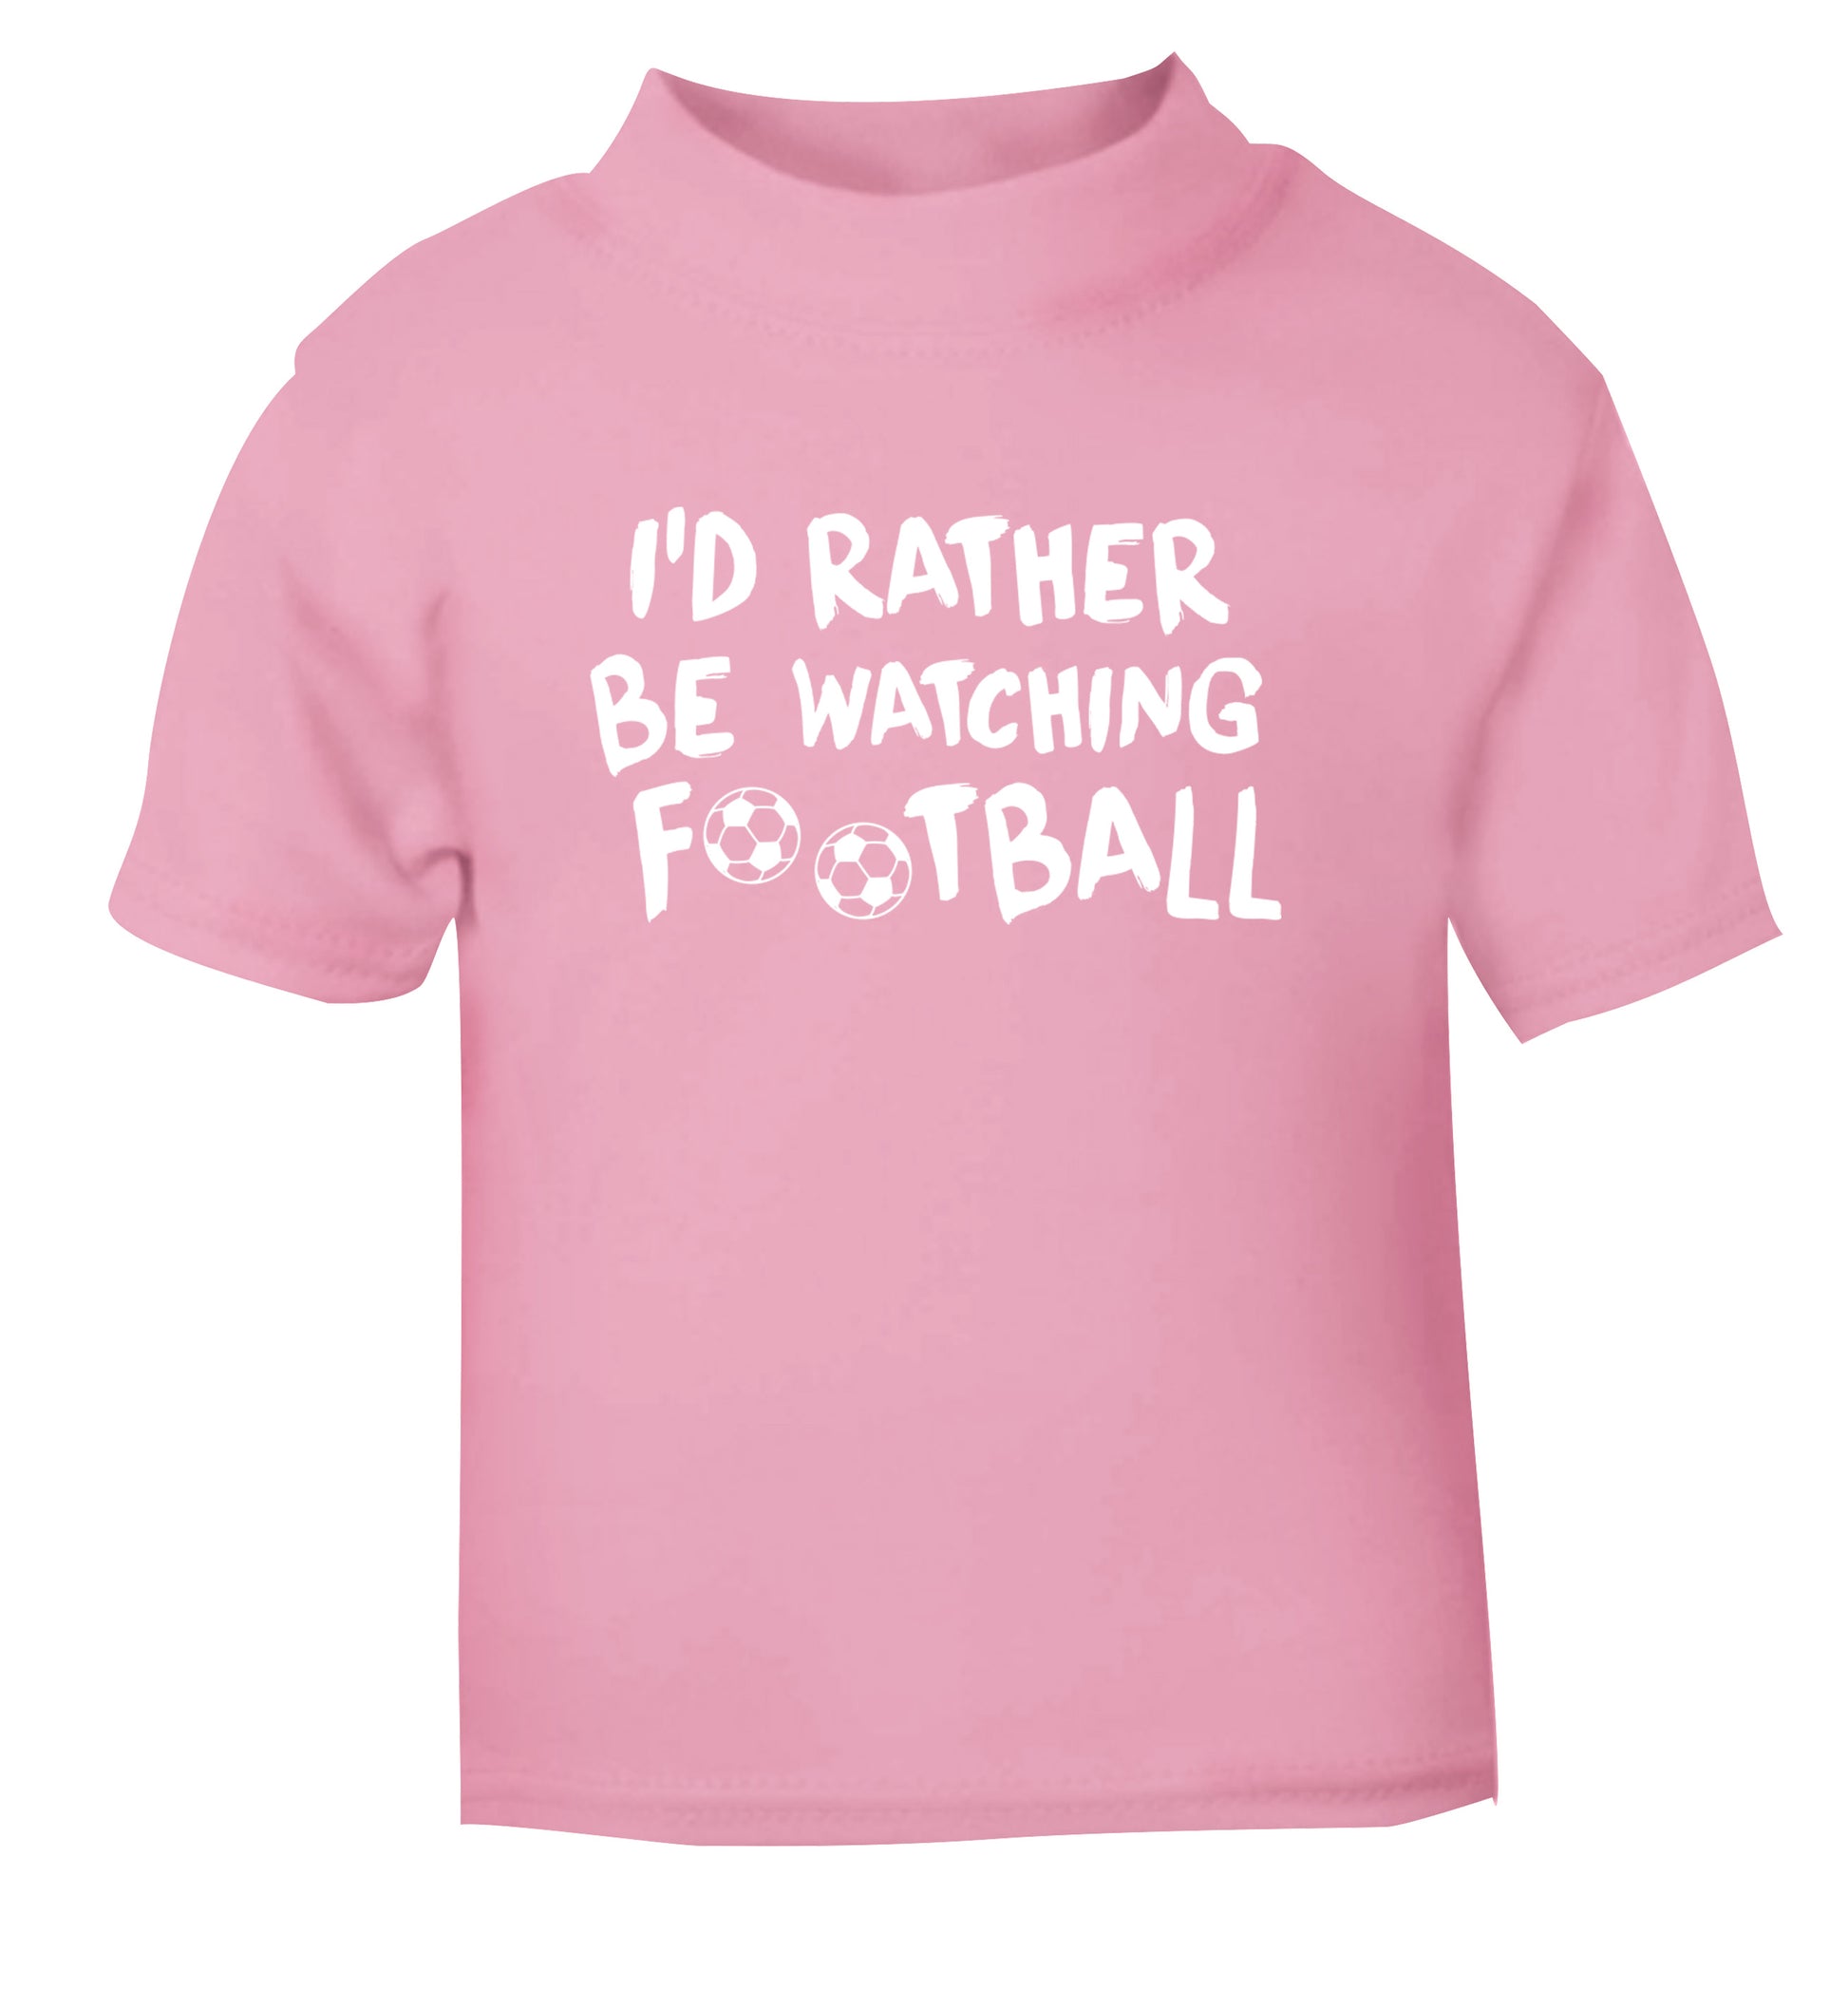 I'd rather be watching football light pink Baby Toddler Tshirt 2 Years